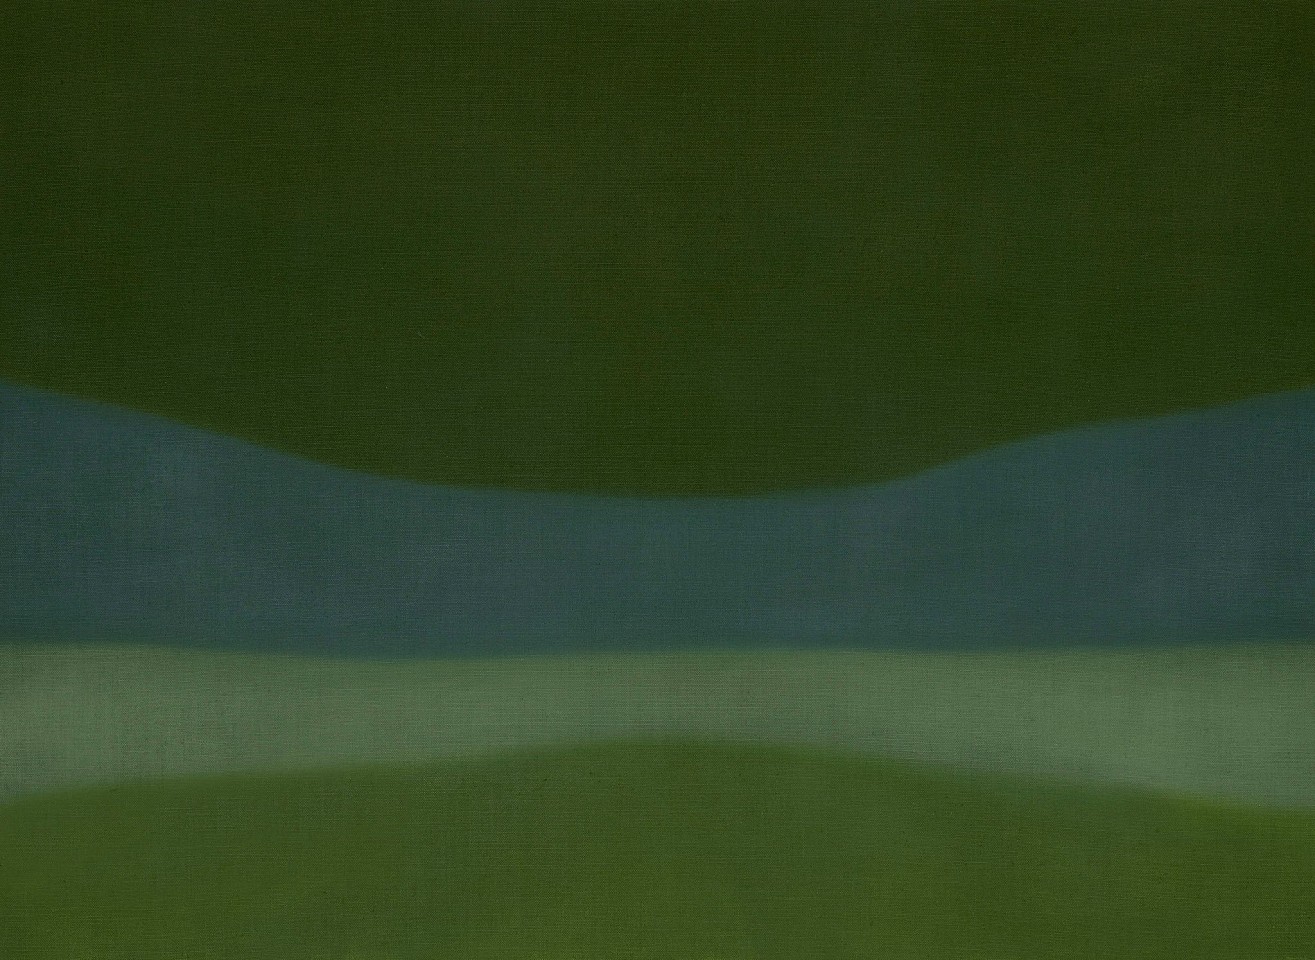 Susan Vecsey, Untitled (Green Nocturne) | SOLD, 2020
Oil on linen, 38 x 52 in. (96.5 x 132.1 cm)
VEC-00212